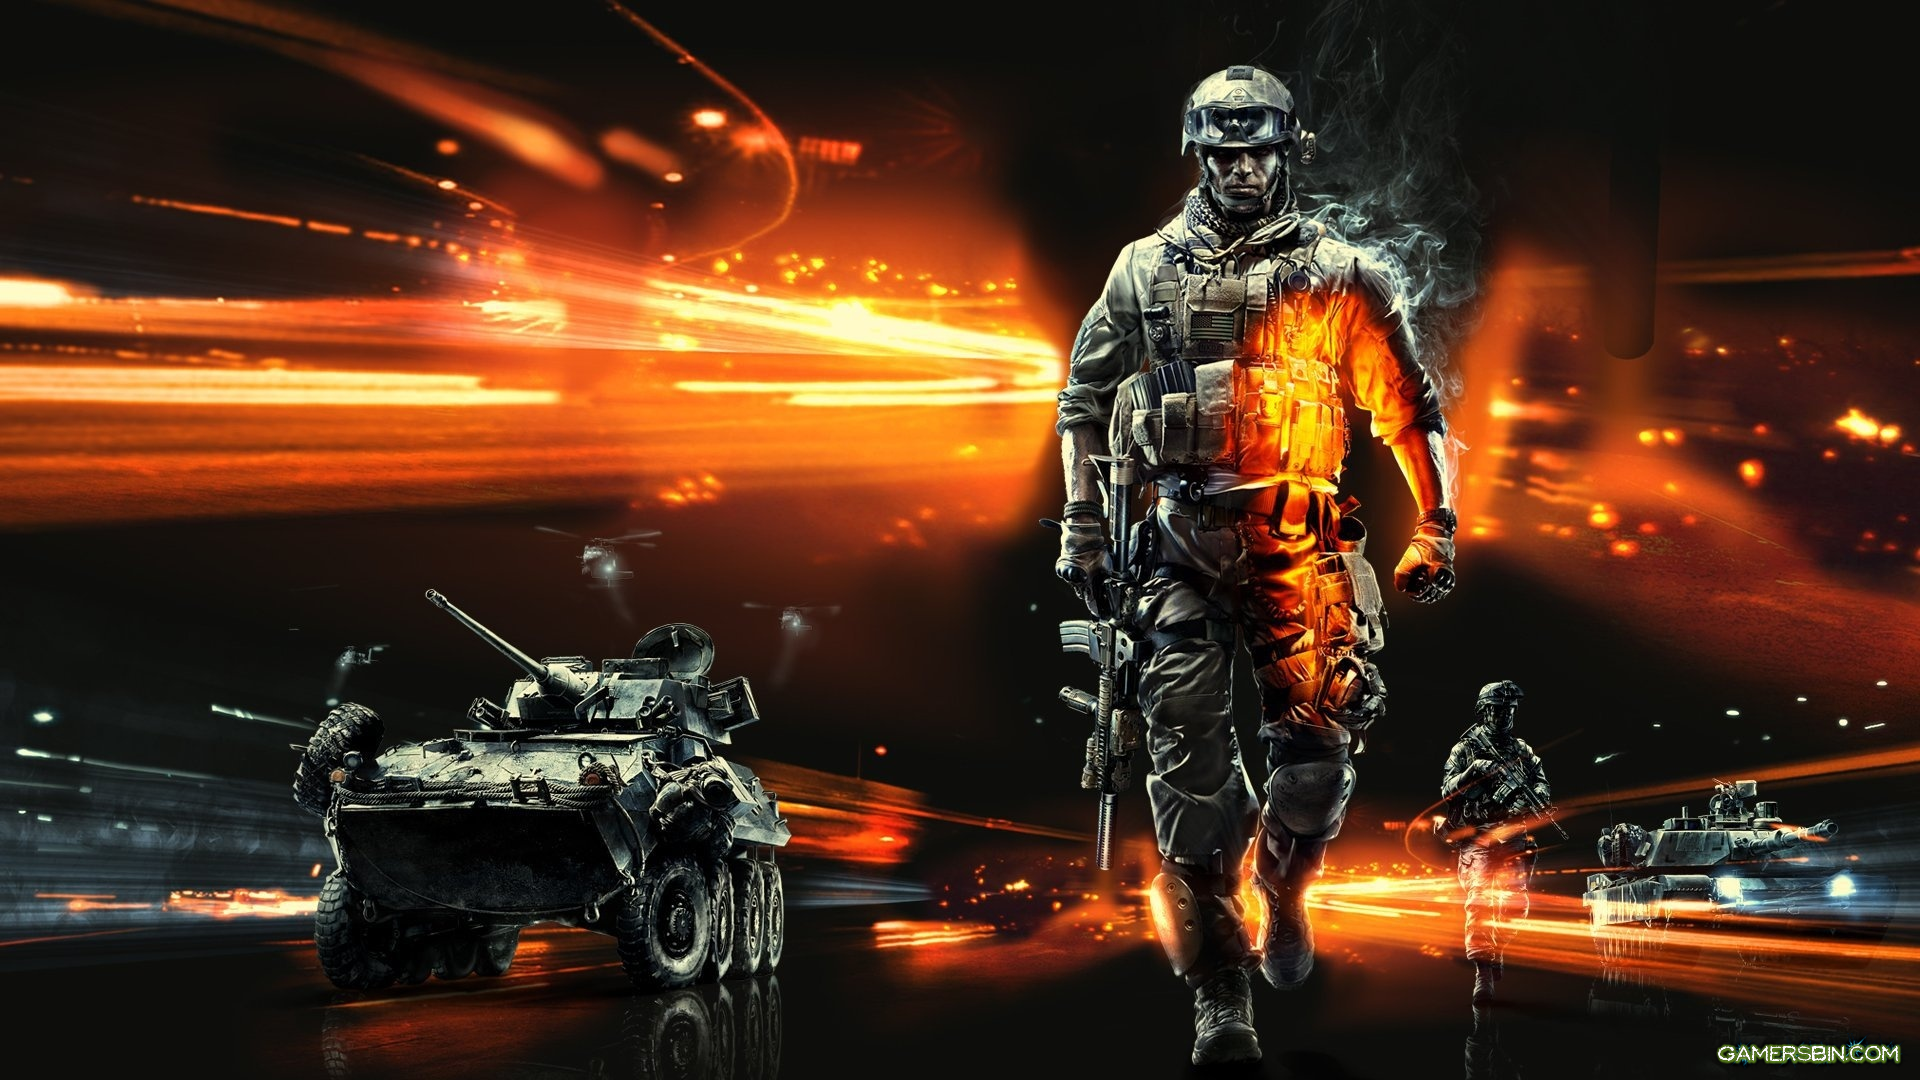 hd battlefield 3 wallpapers battlefield wallpaper hd soldiers arms